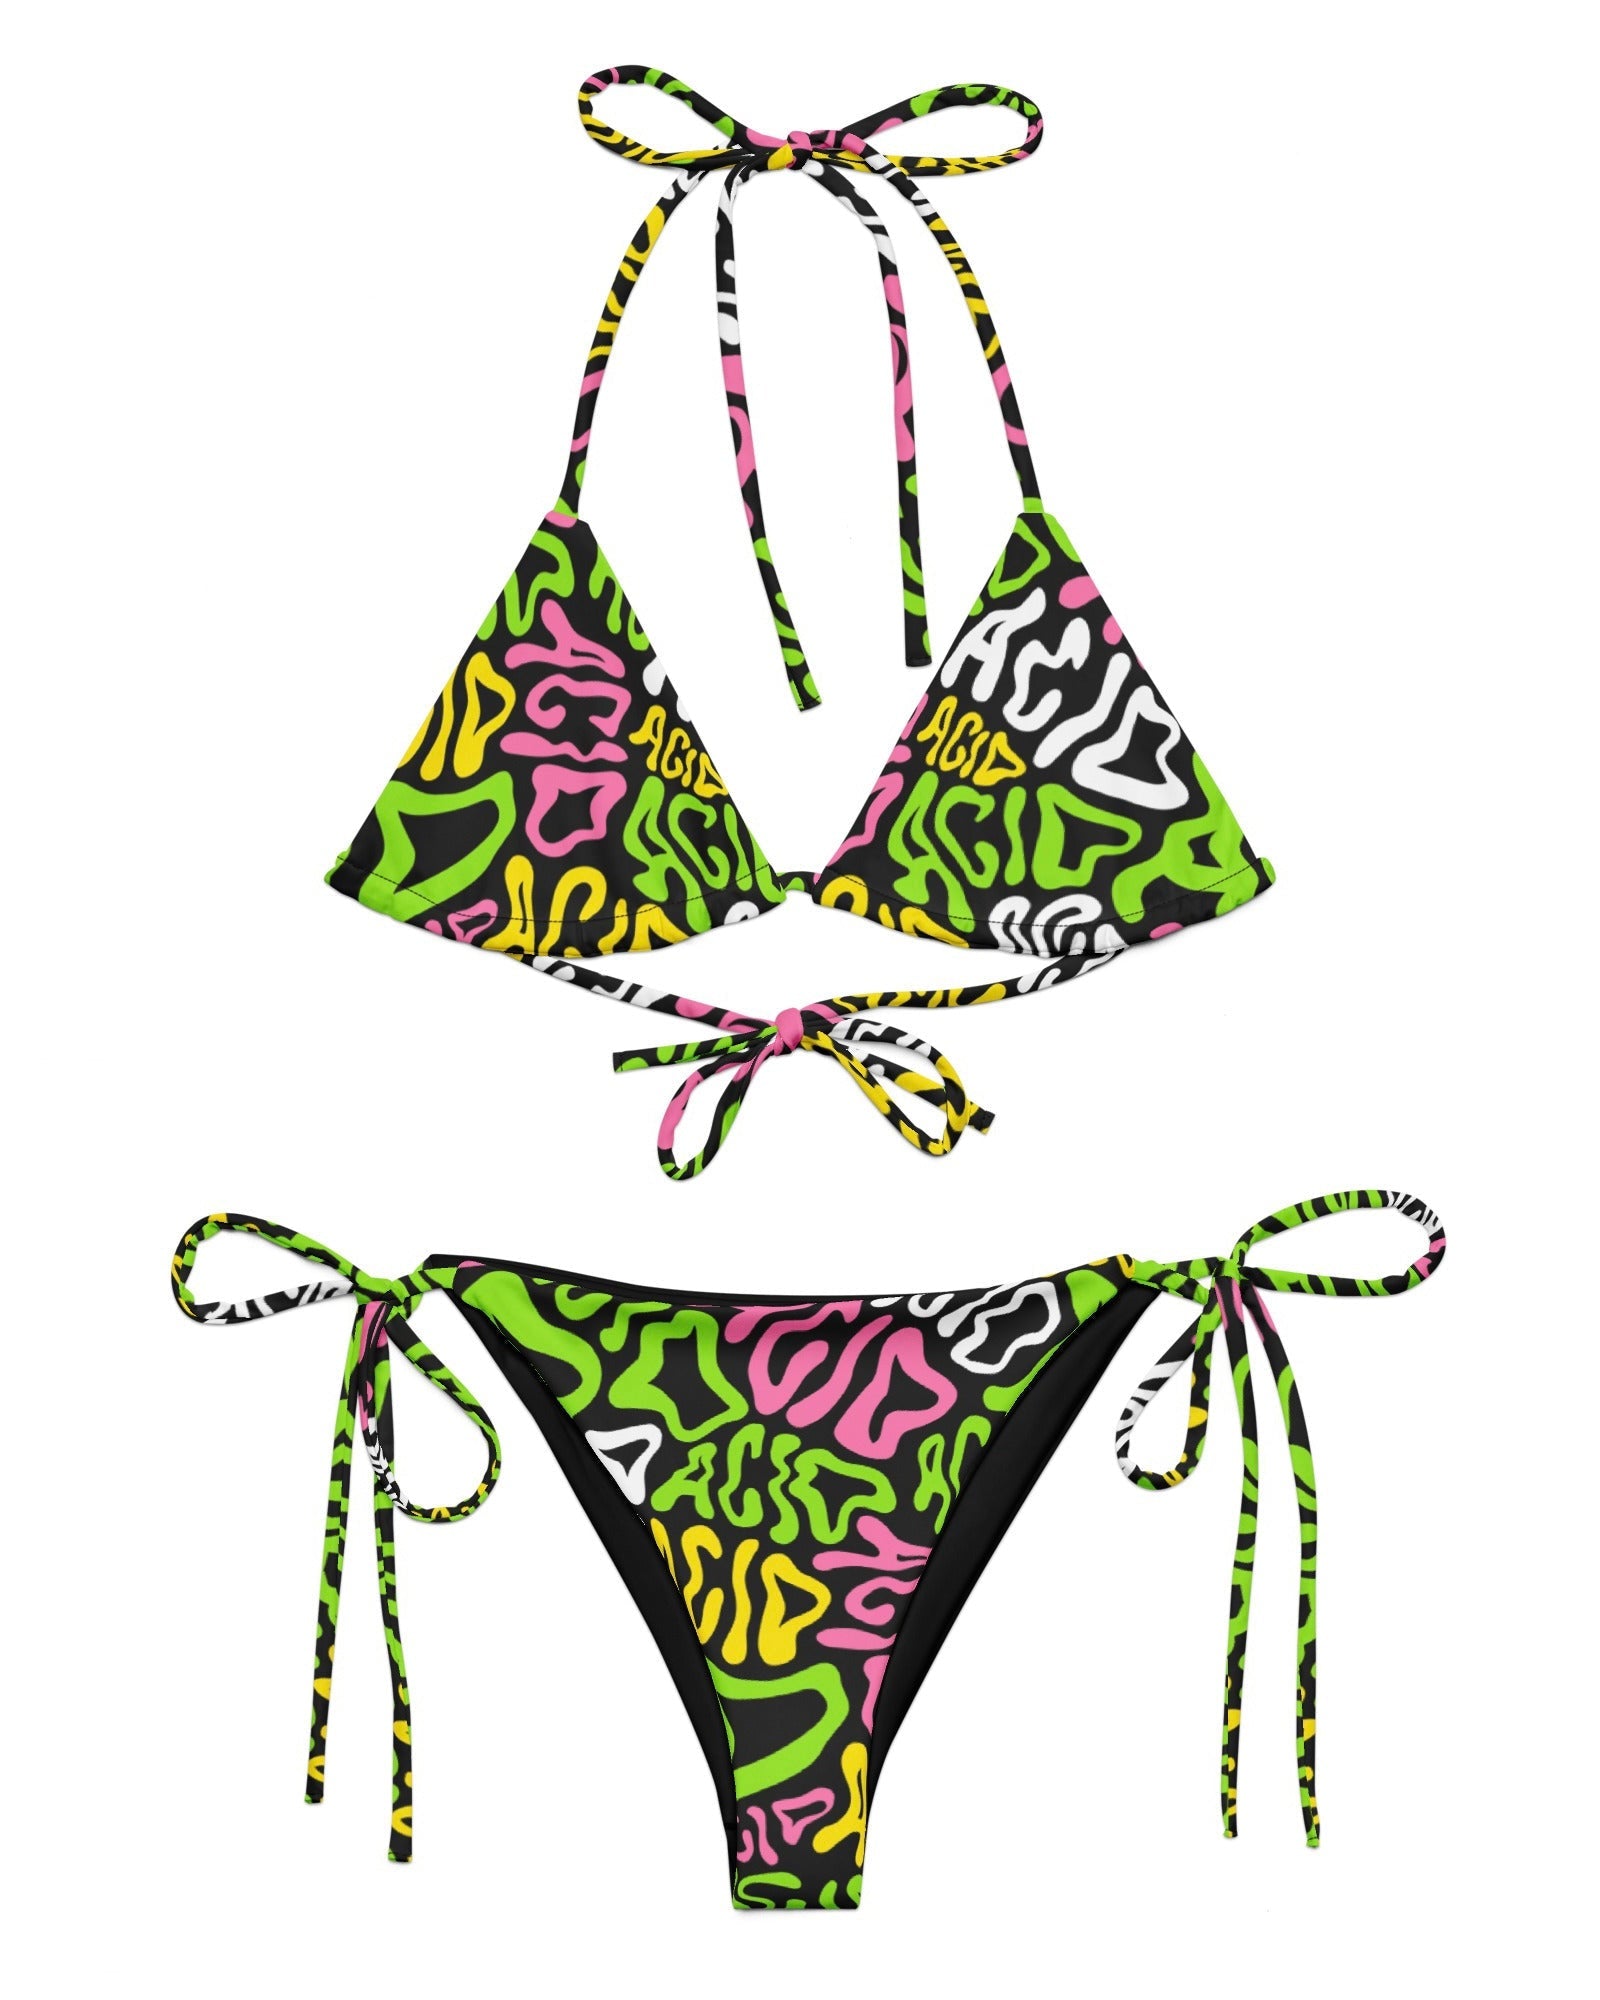 Candy Acid Triangle Top & Candy Acid String Bottoms by One Stop Rave on a white background.